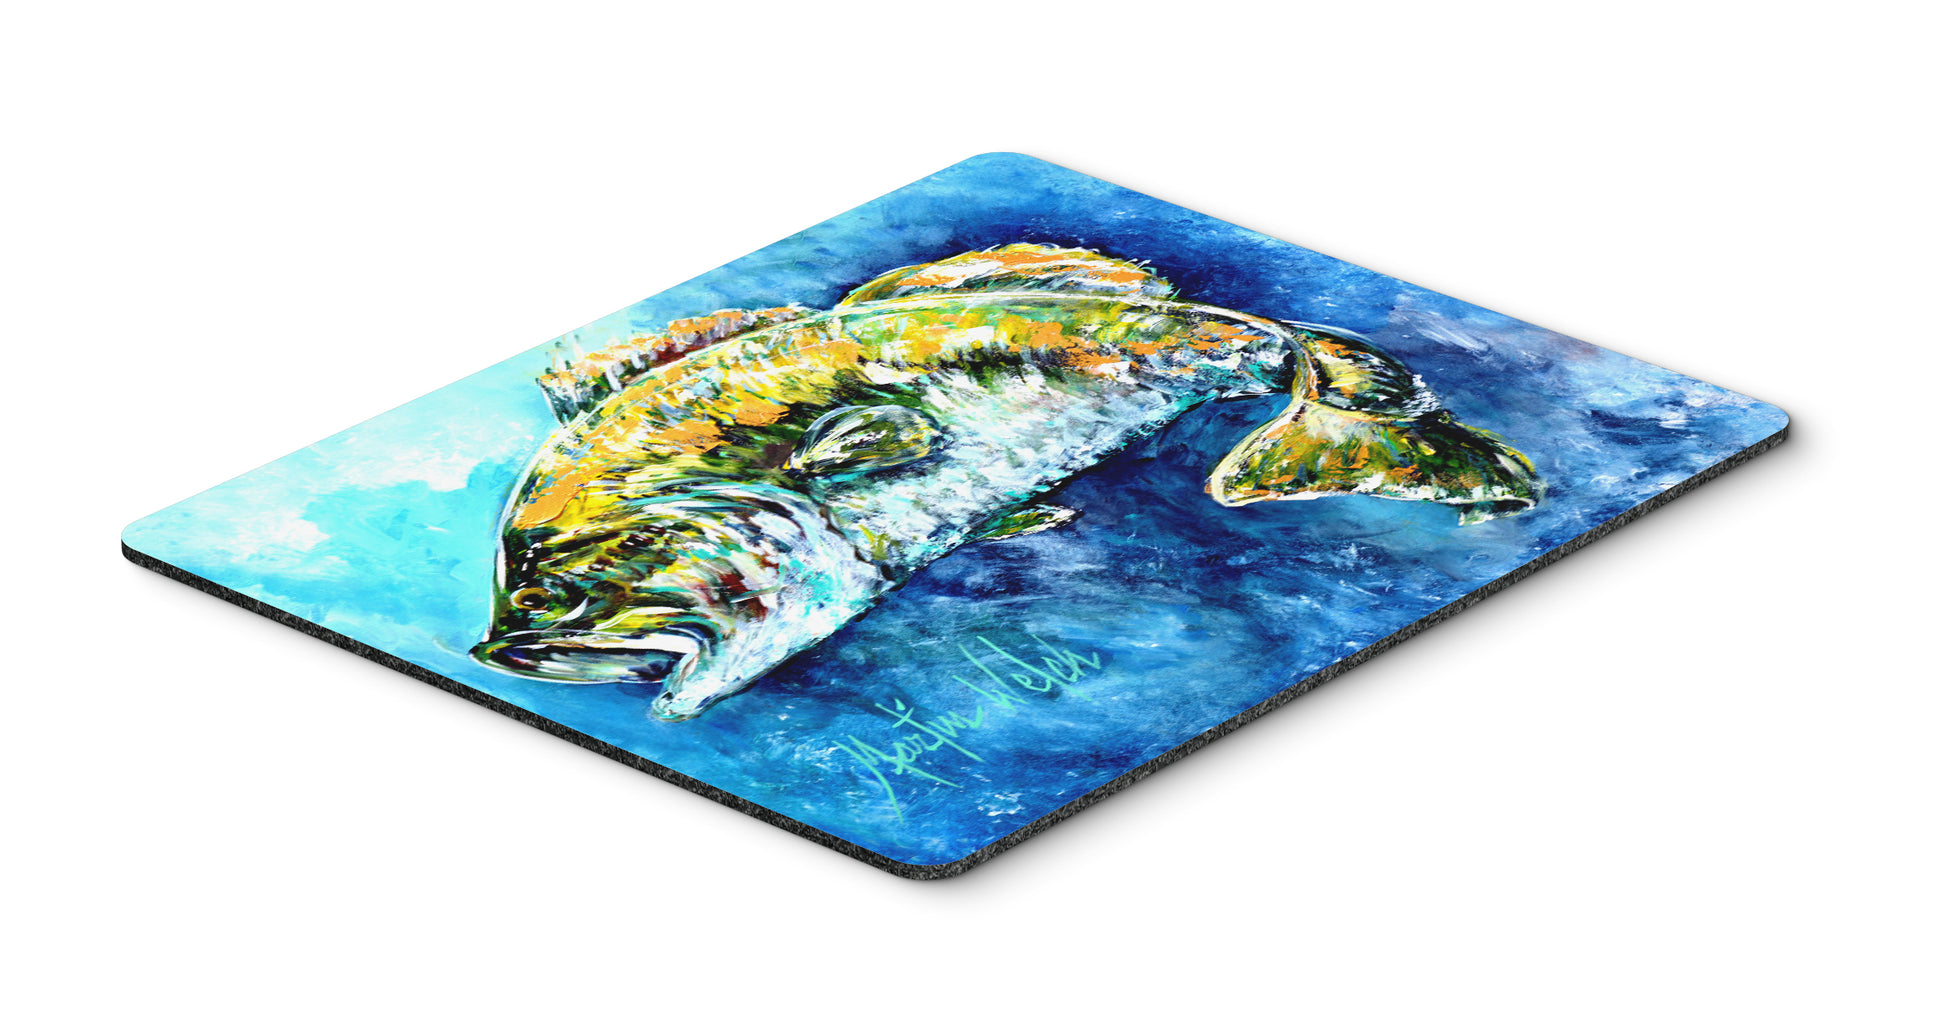 Buy this Bobby Bass Mouse Pad, Hot Pad or Trivet